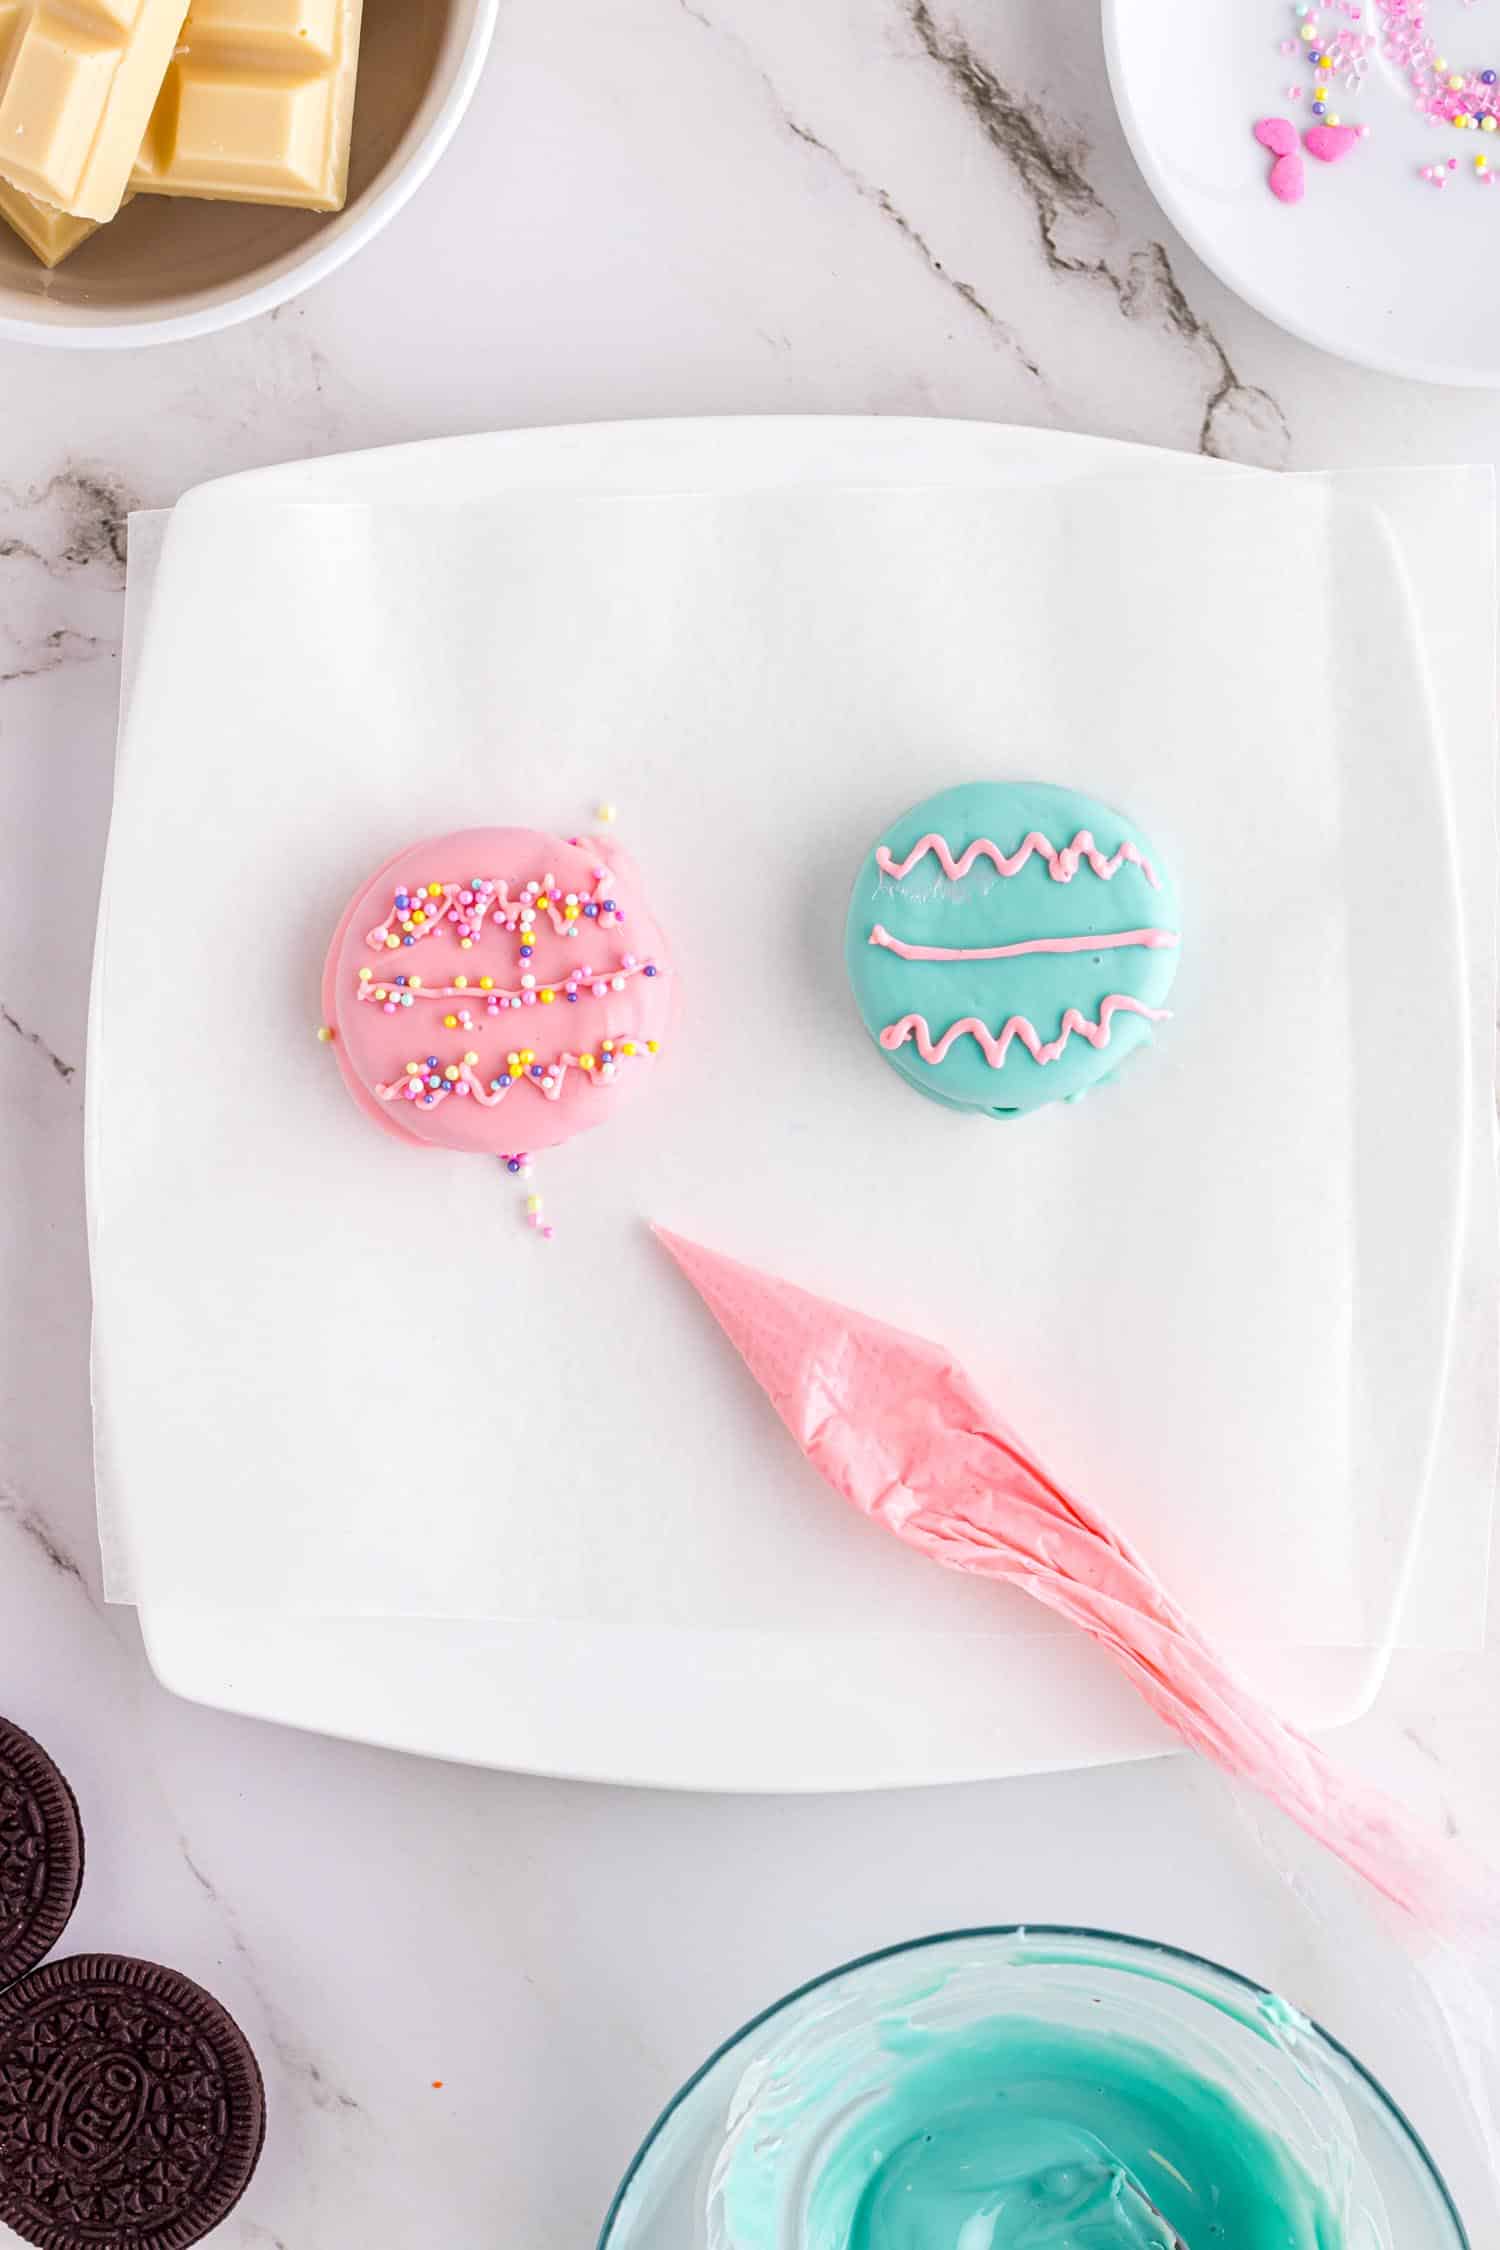 Two chocolate dipped Oreos on plate with emptied piping bag and icing